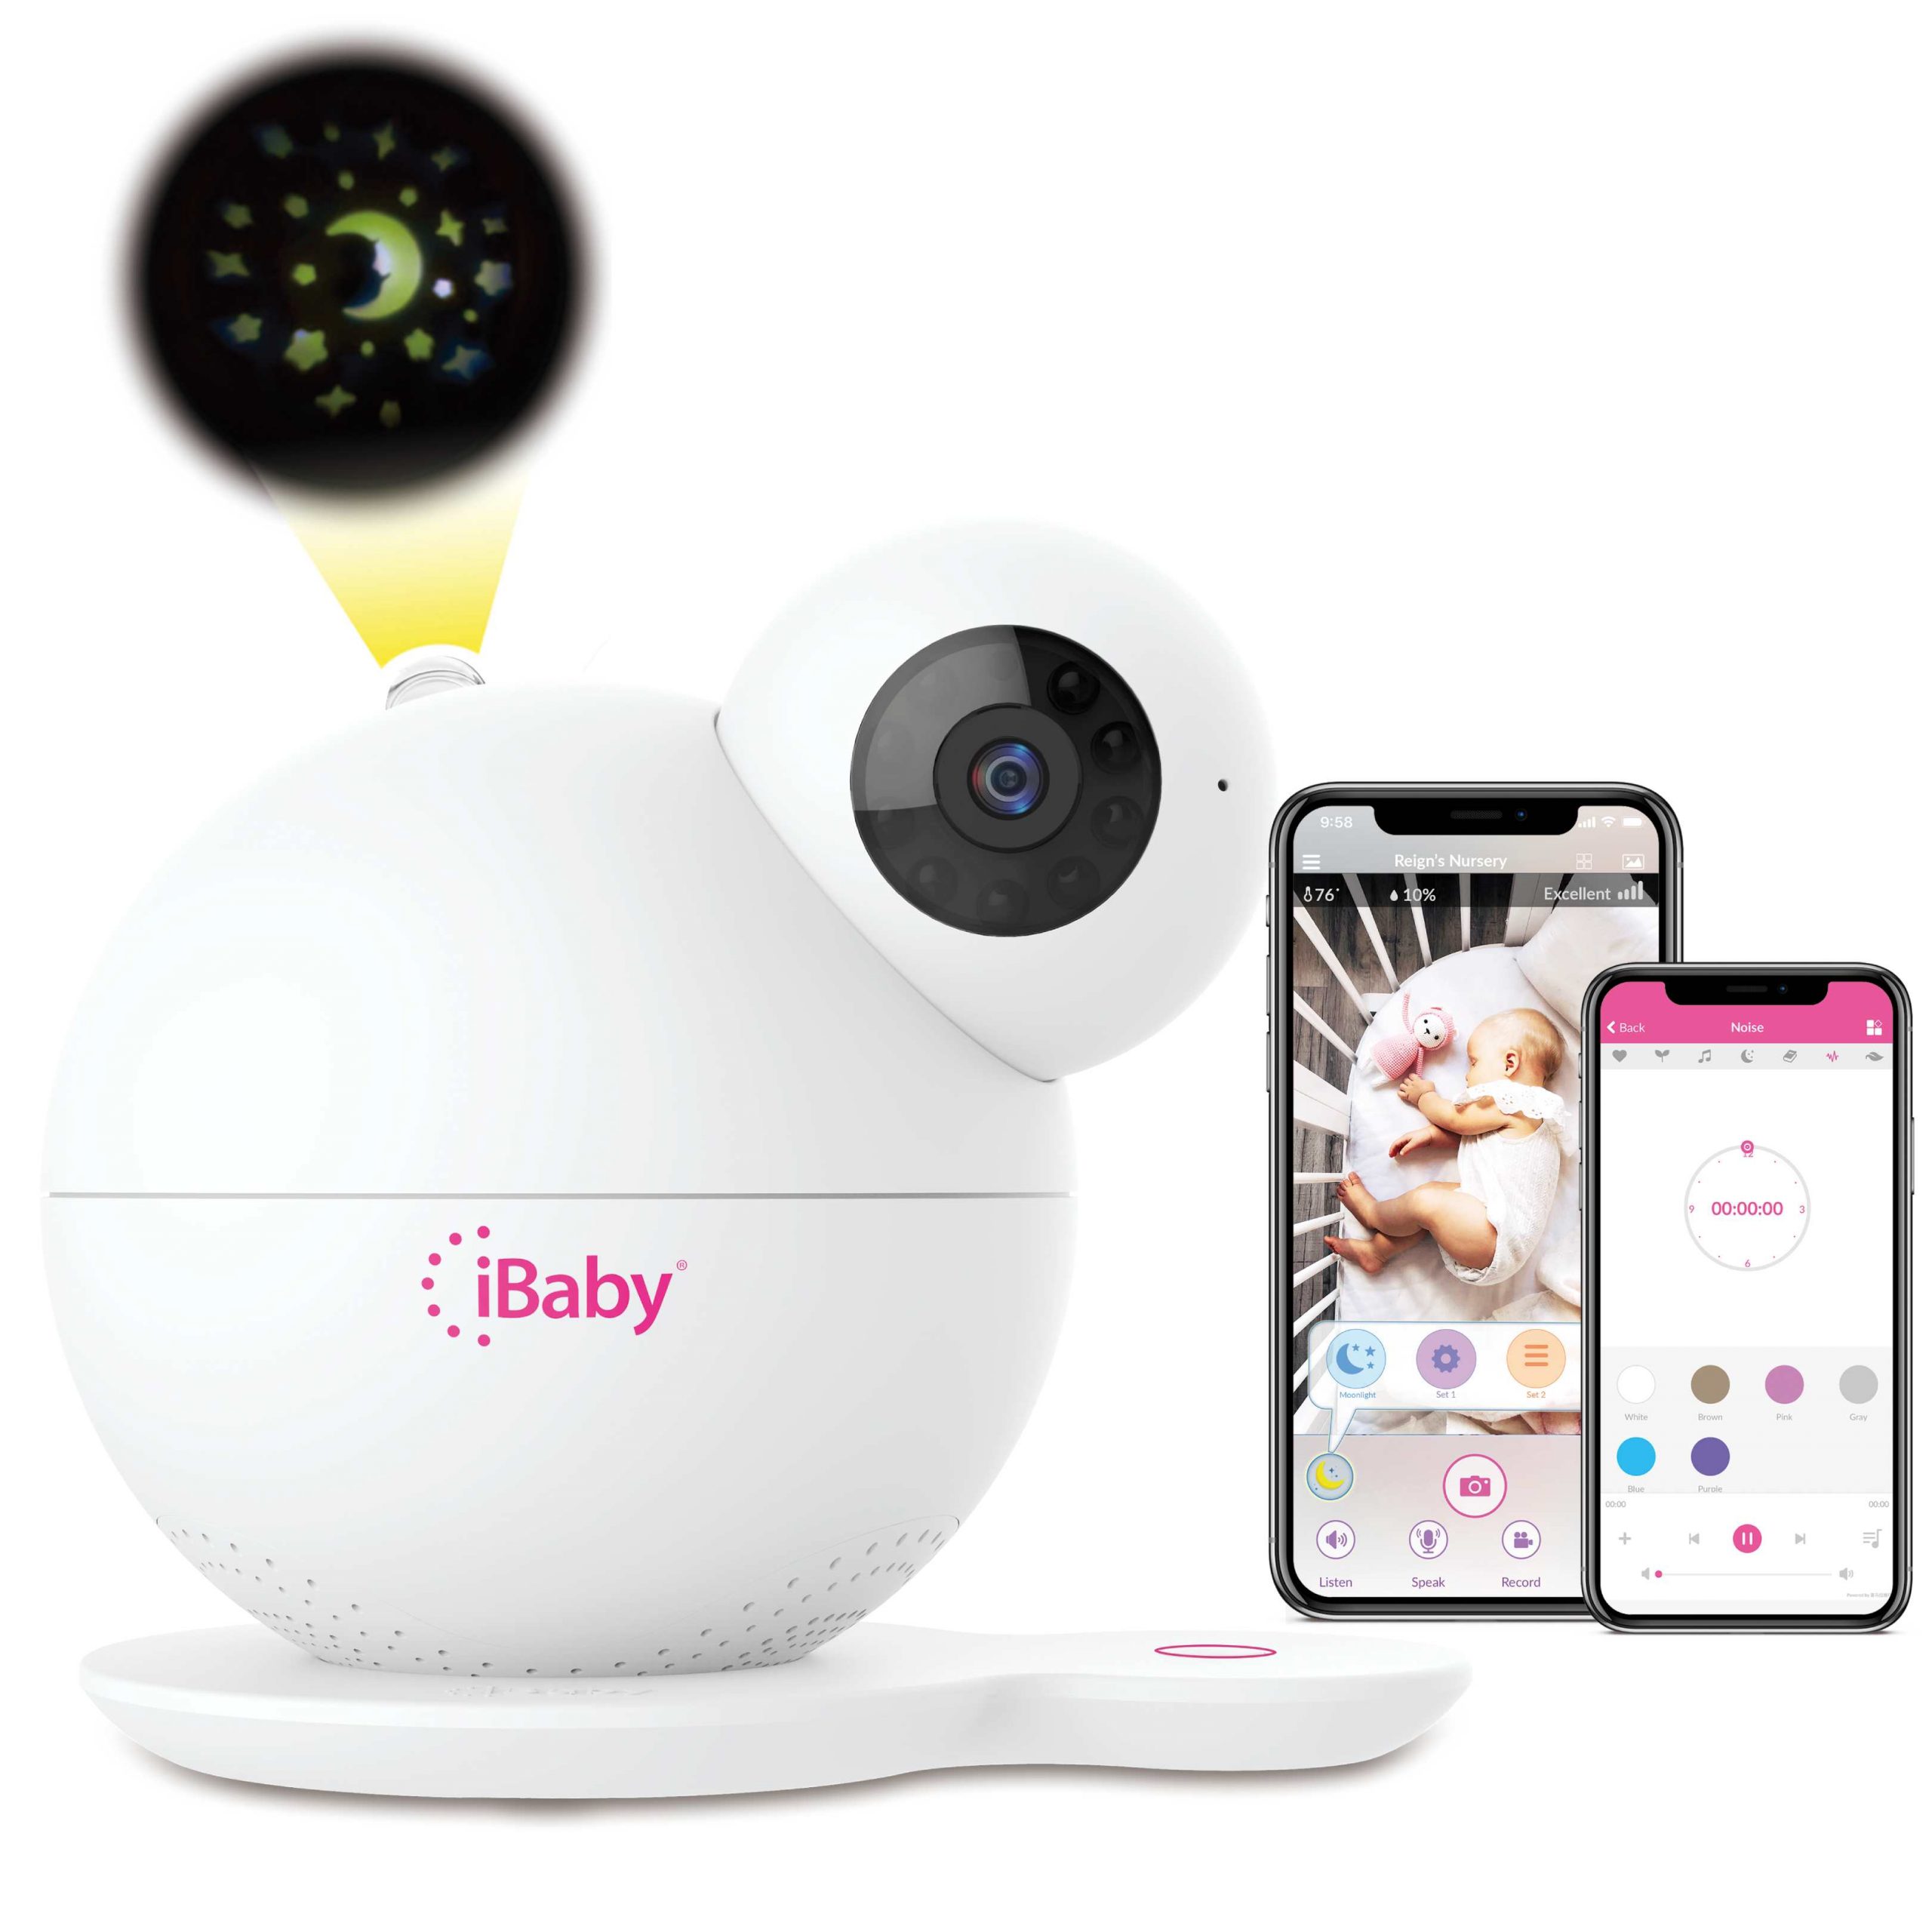 ibaby monitor app